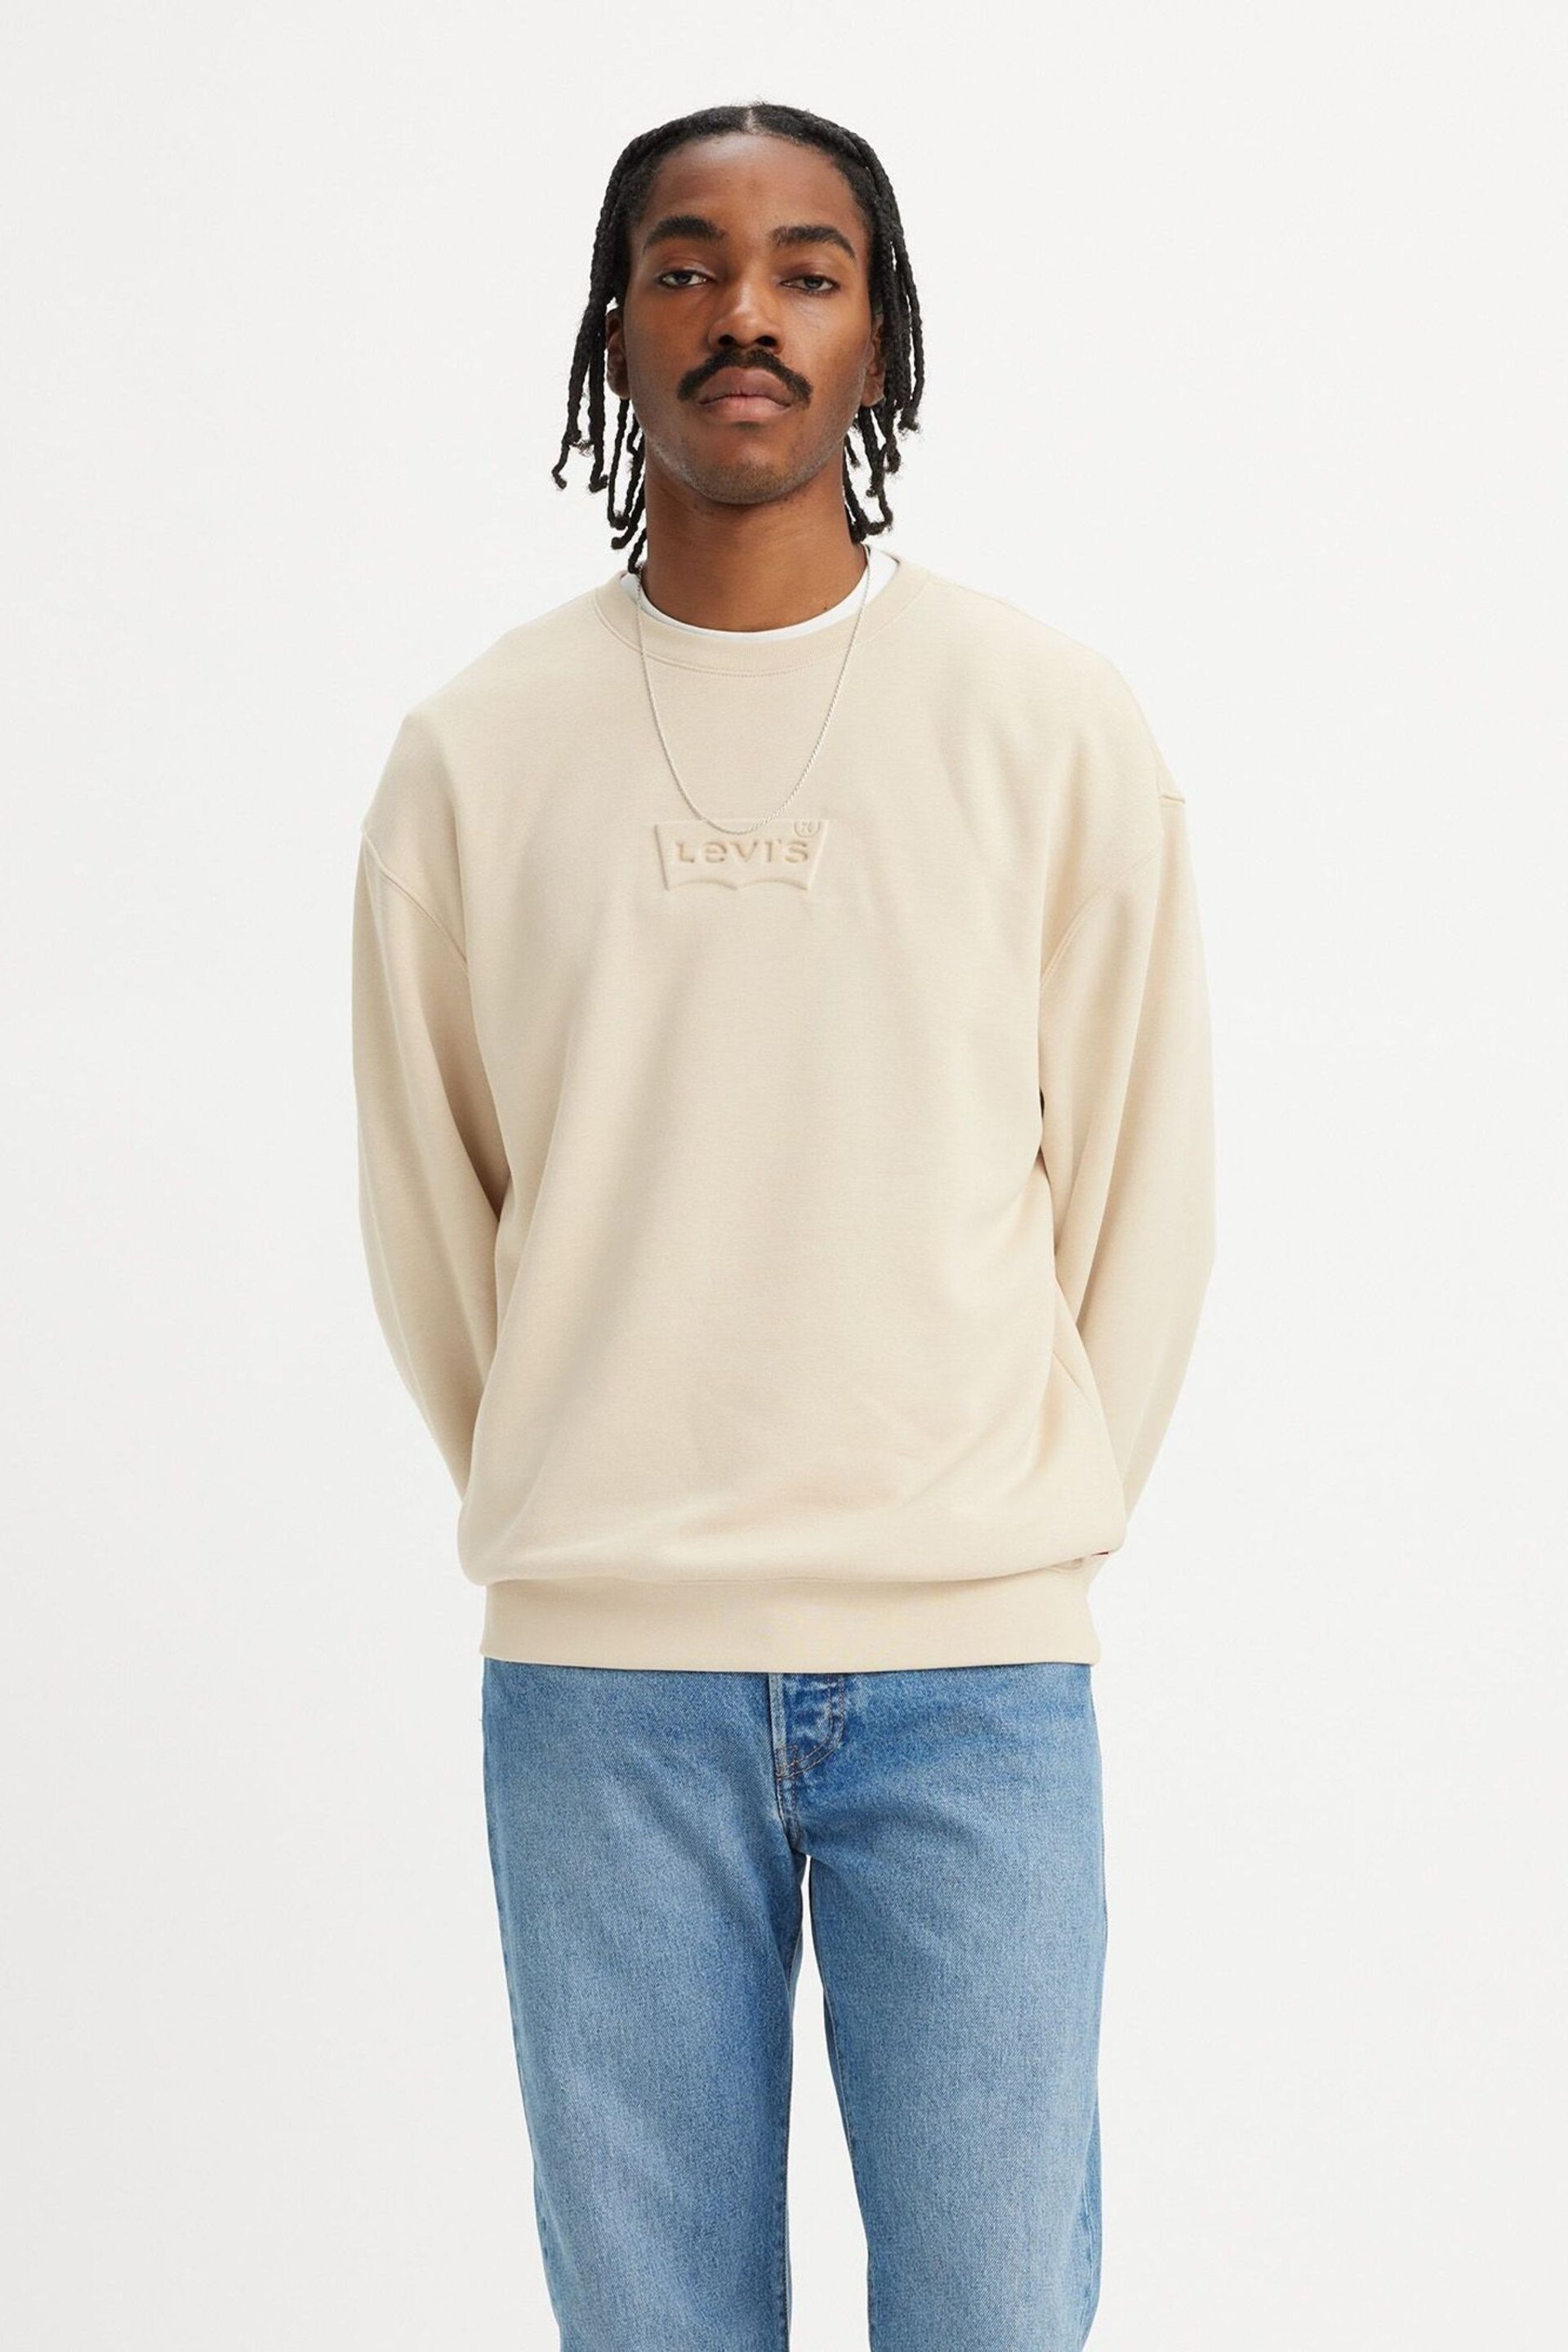 Levi's® Nude Relaxed Fit Graphic Crewneck Sweatshirt - Image 3 of 6